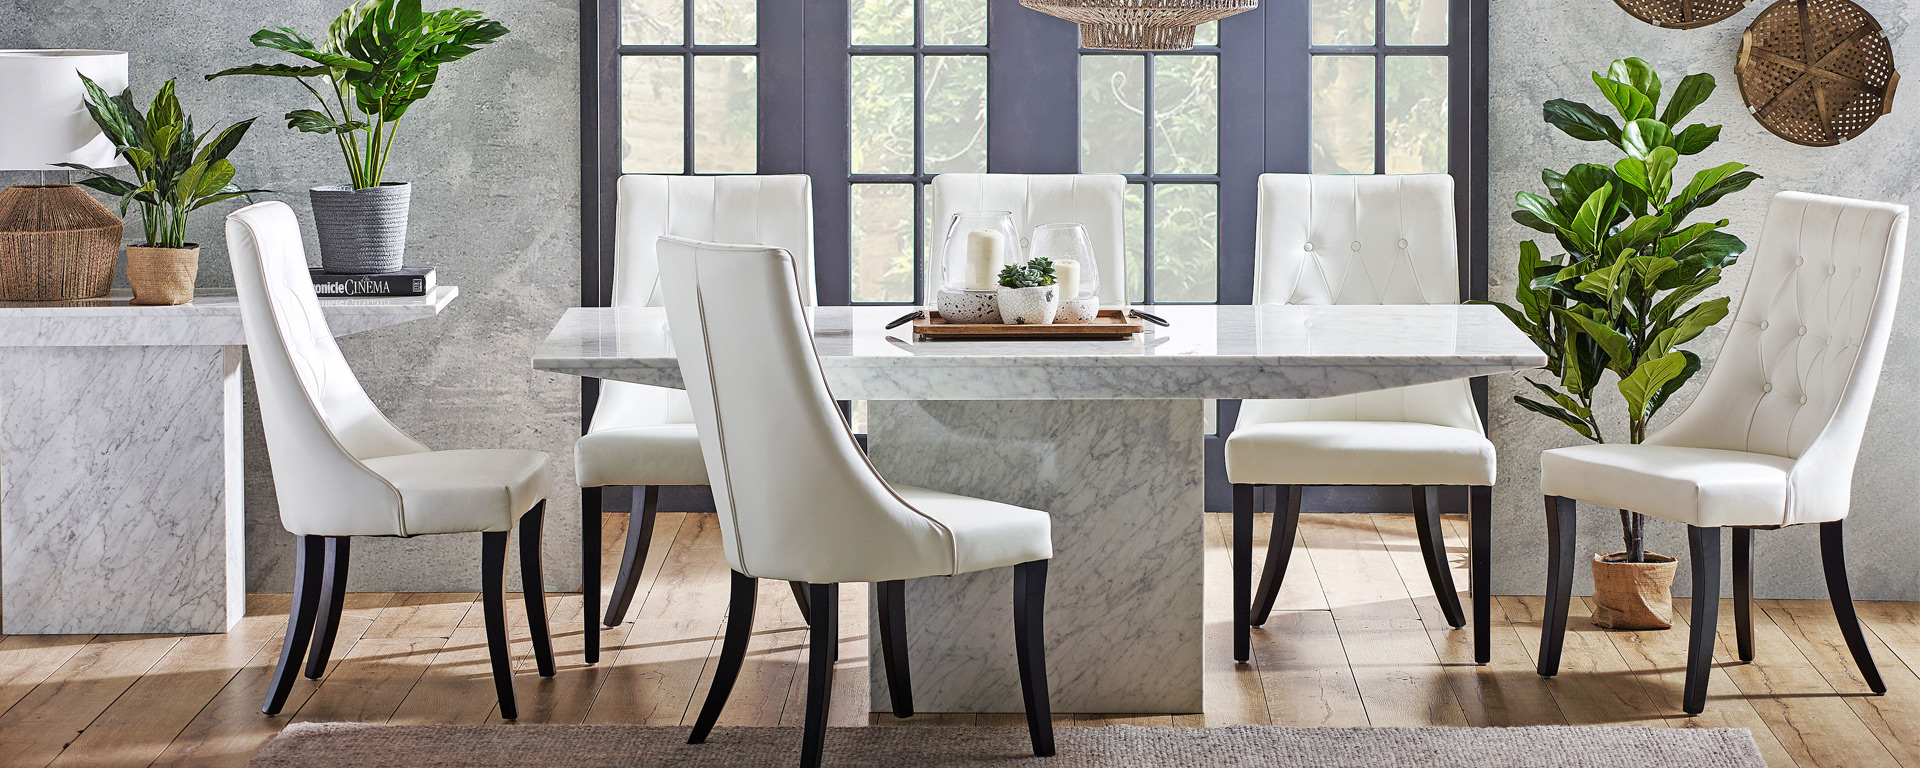 Dining Room Goals 5 Trending Concrete And Stone Dining throughout sizing 1920 X 768